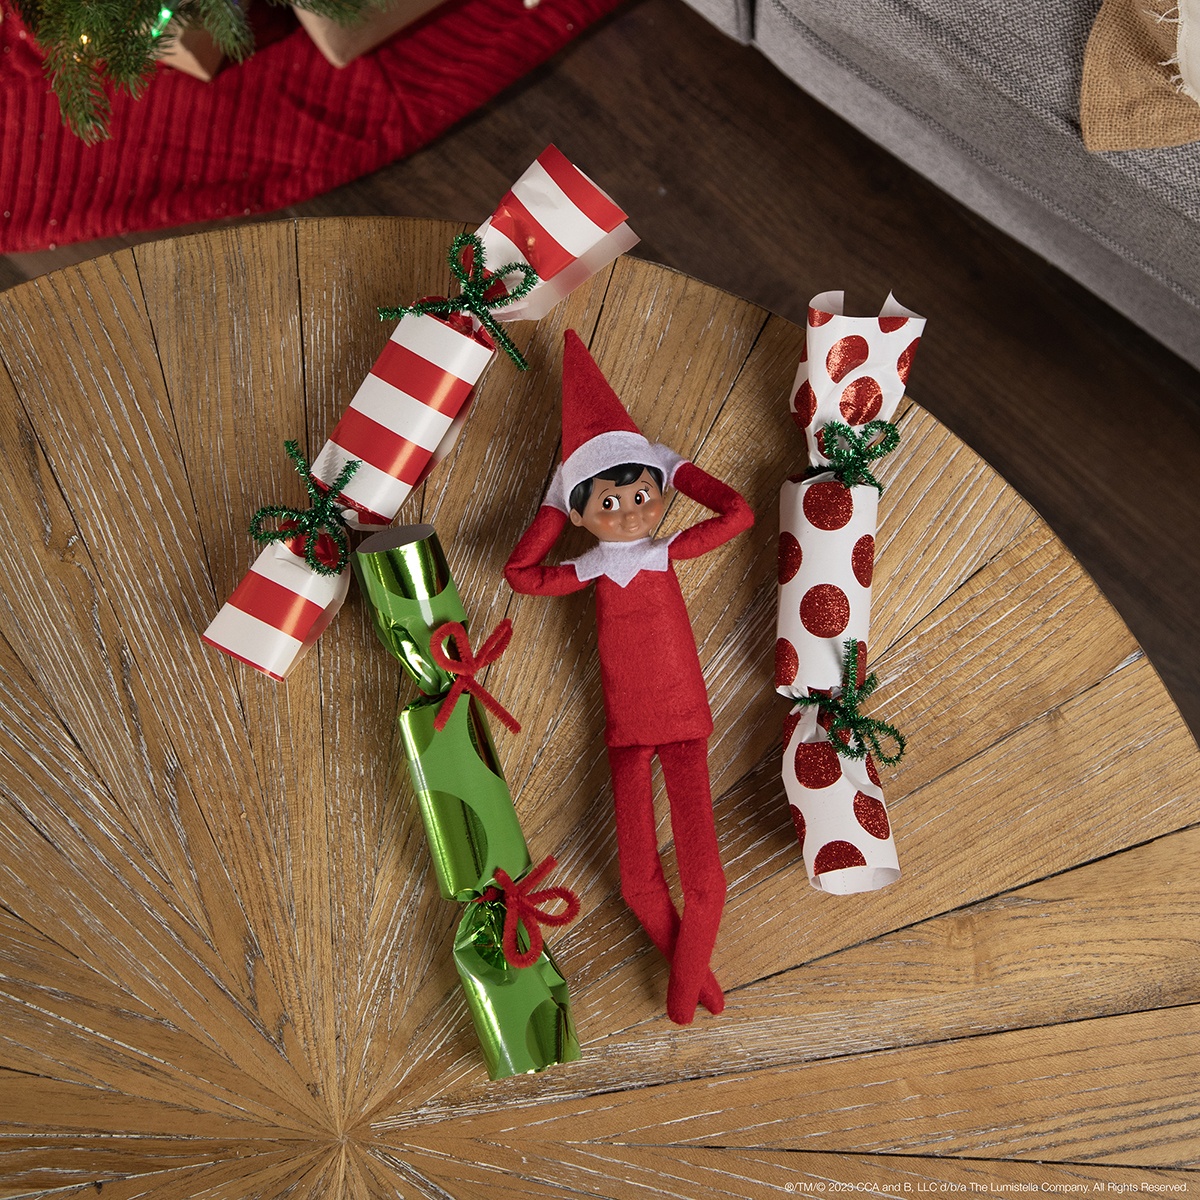 The Elf on the Shelf lying next to Christmas crackers with candies inside. 